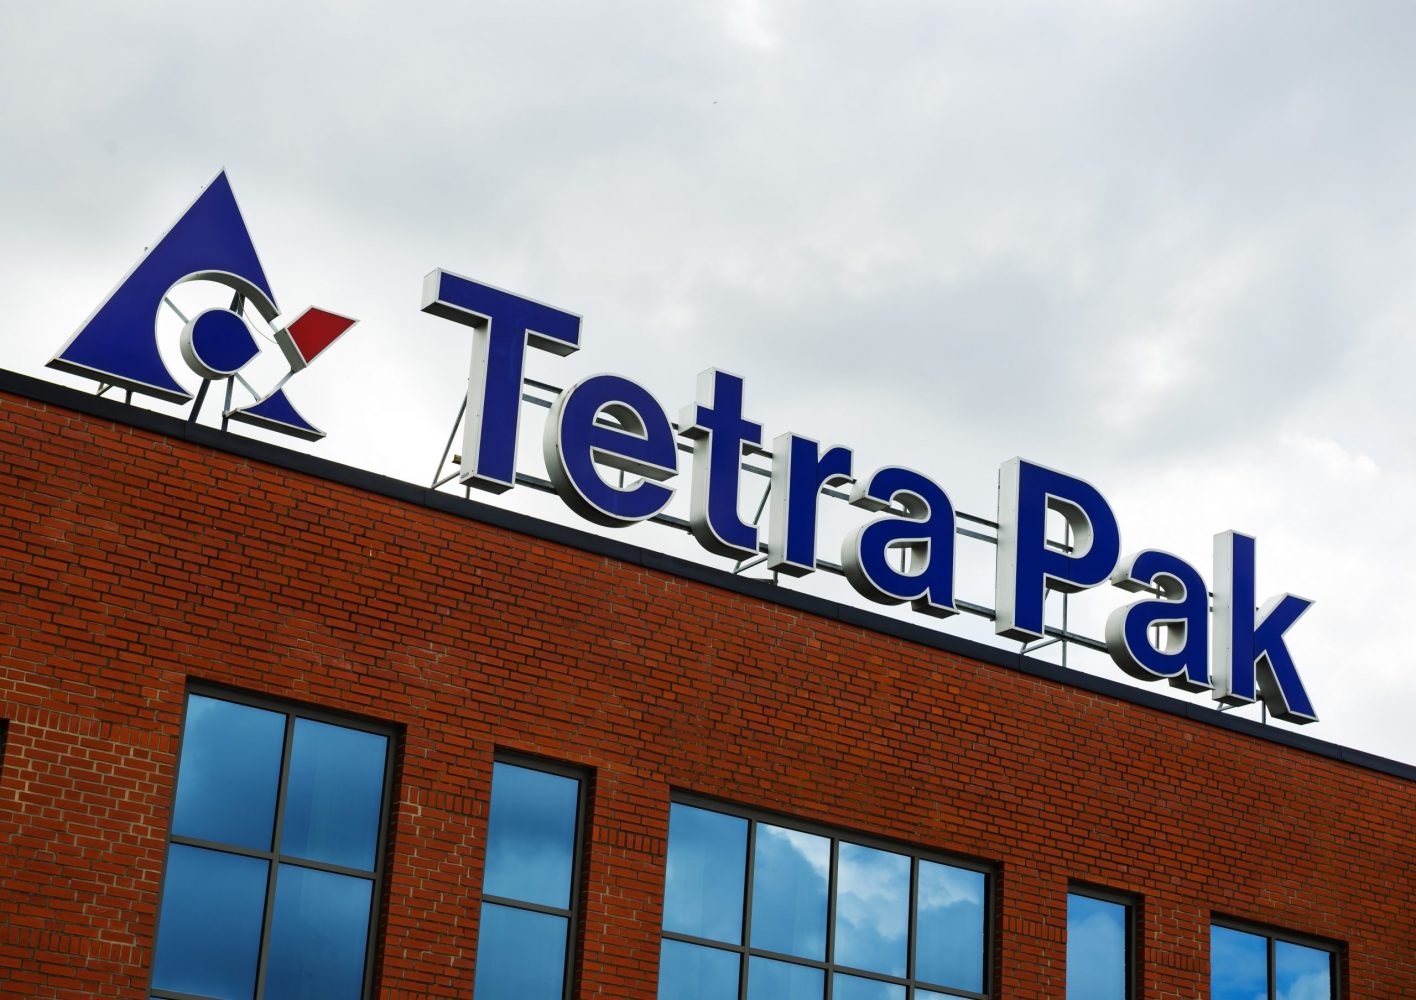 Tetra Pak’s Sustainability Report shows strong actions to meet Net Zero ambition